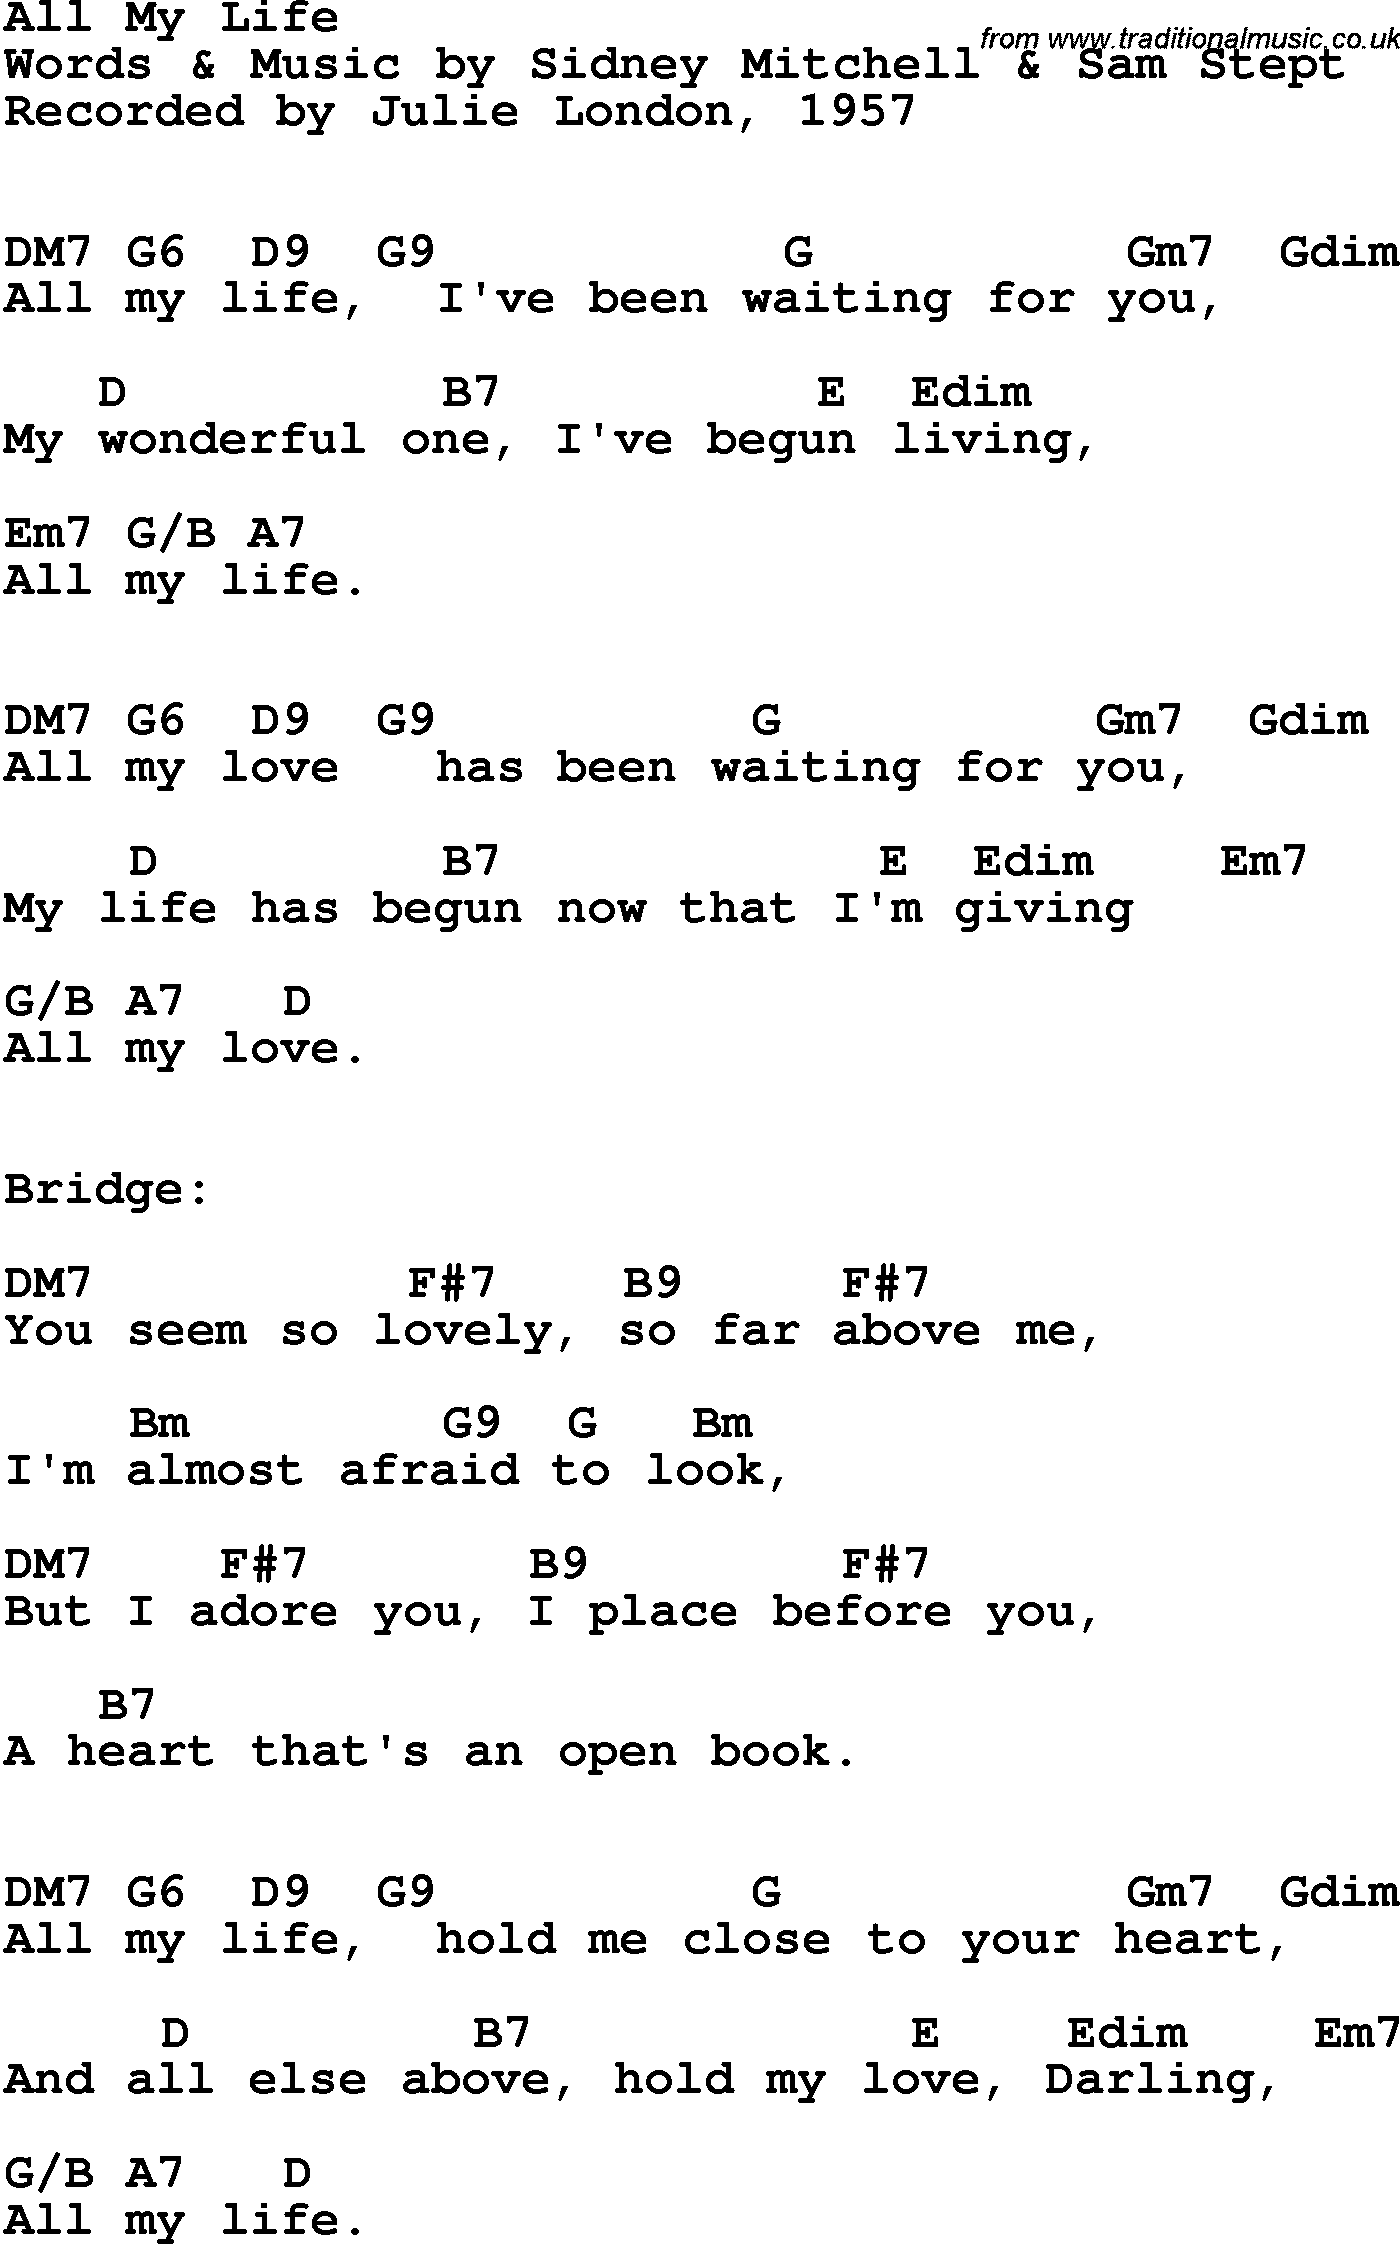 Song Lyrics with guitar chords for All My Life - Julie London, 1957